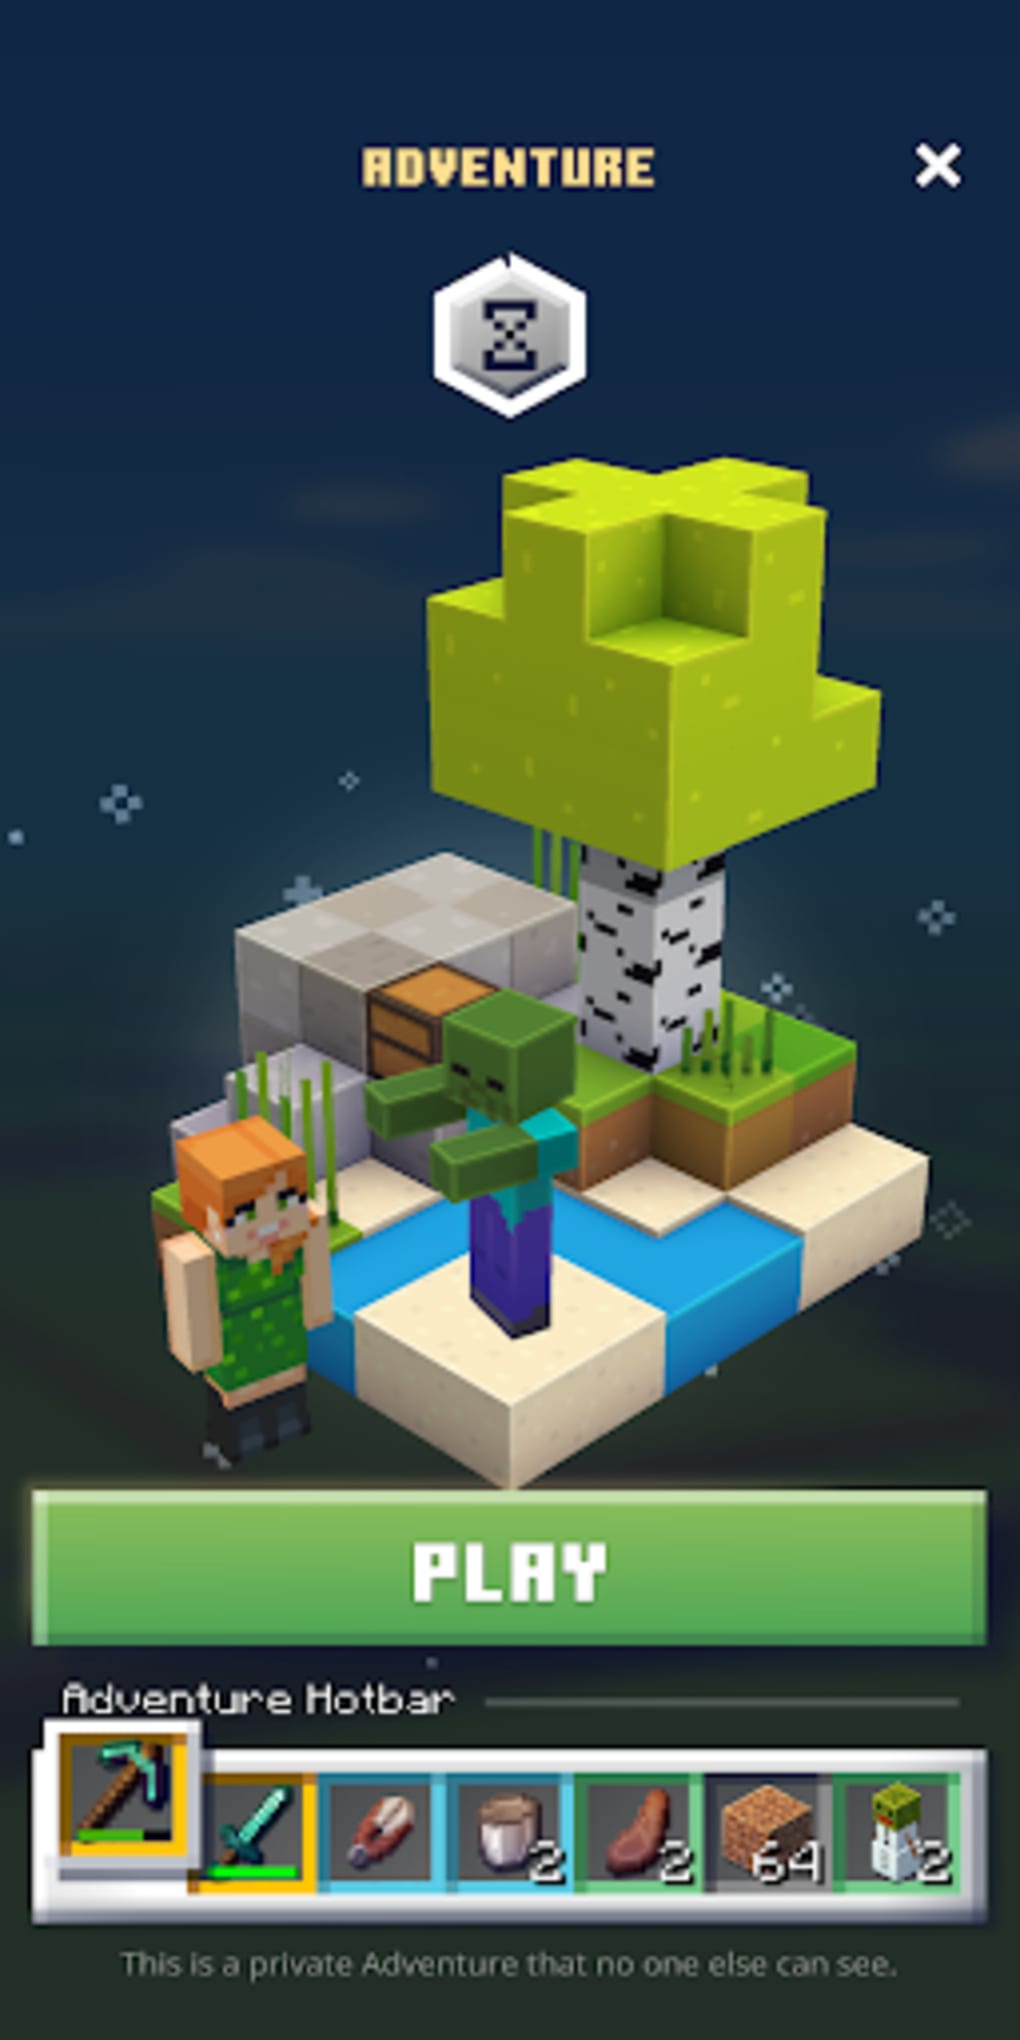 Download Minecraft Earth Mobile APK For Android & iOS 